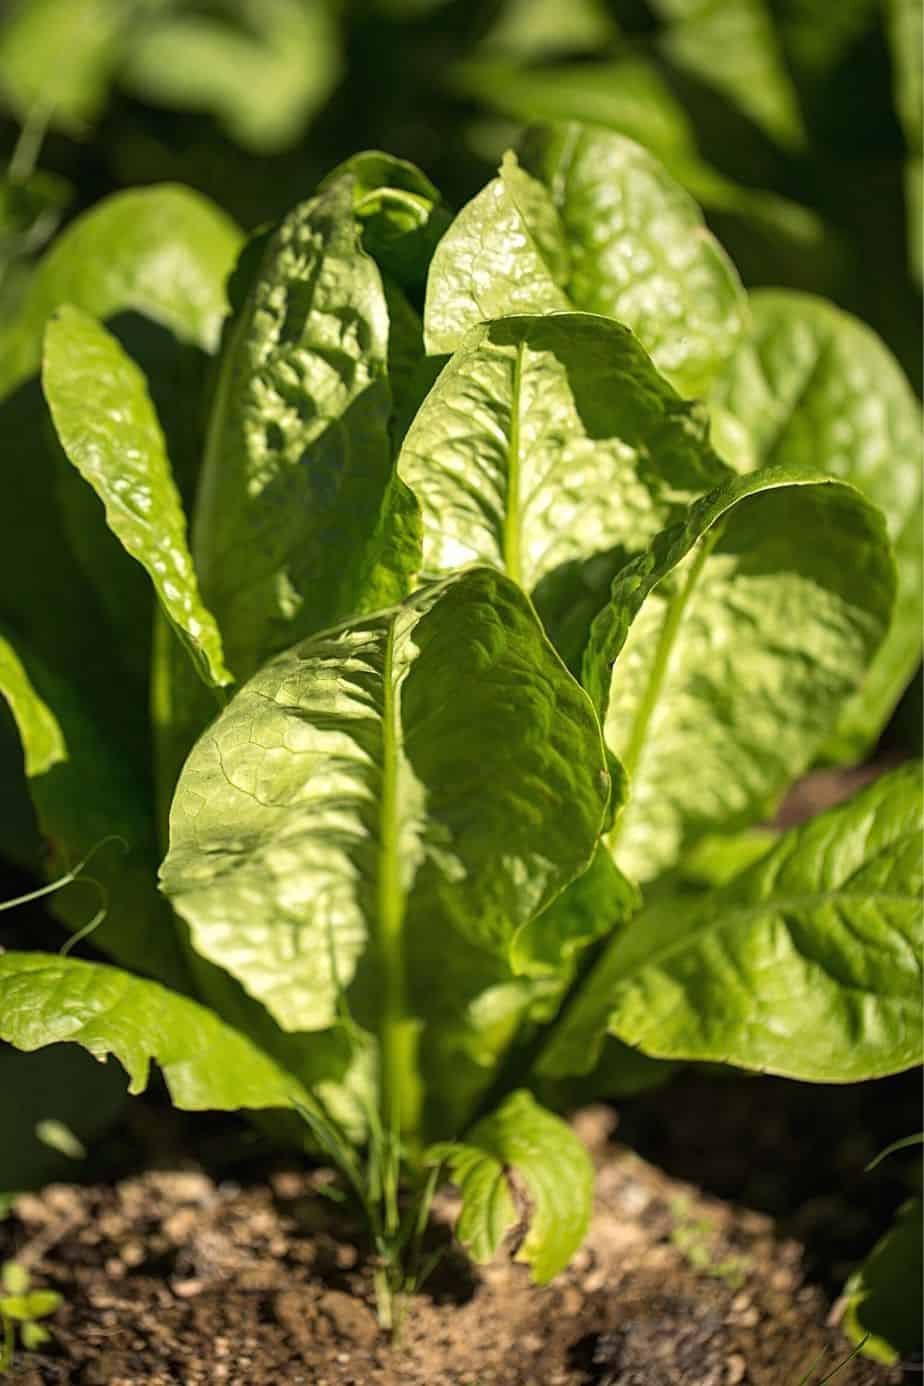 Spinach is another edible plant you can grow in pots on an east-facing balcony